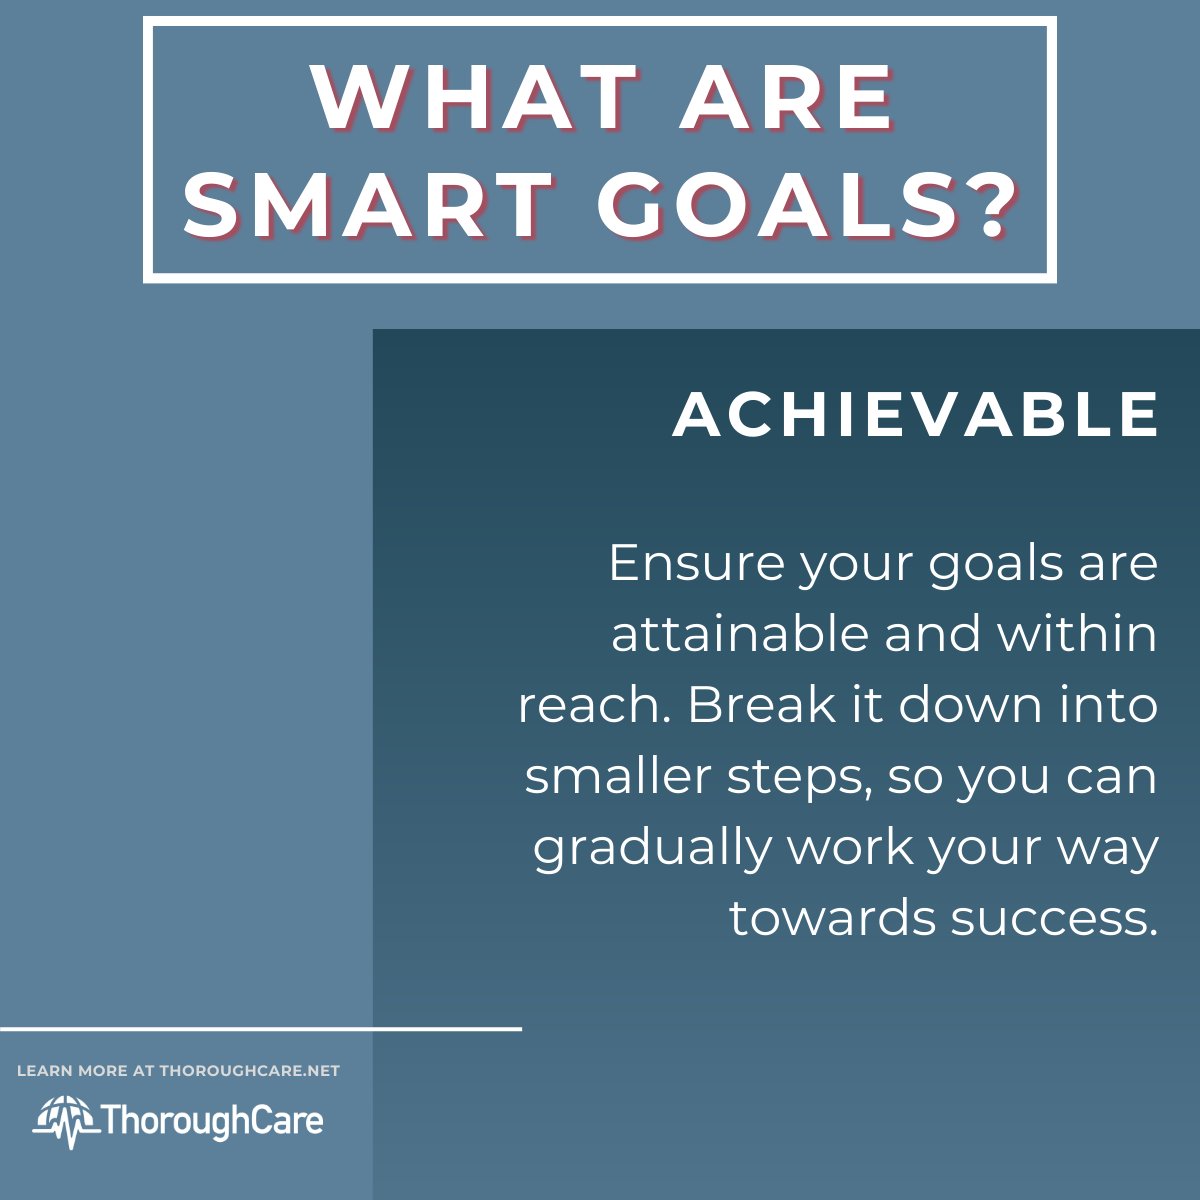 #SMARTGoals #3- Achievable
Setting achievable goals can help motivate patients to take action, boost their confidence, and see tangible progress. Watch out for goal #4! hubs.li/Q02199xR0 #CareManager #CareCoordination #HealthTech #ValueBasedCare